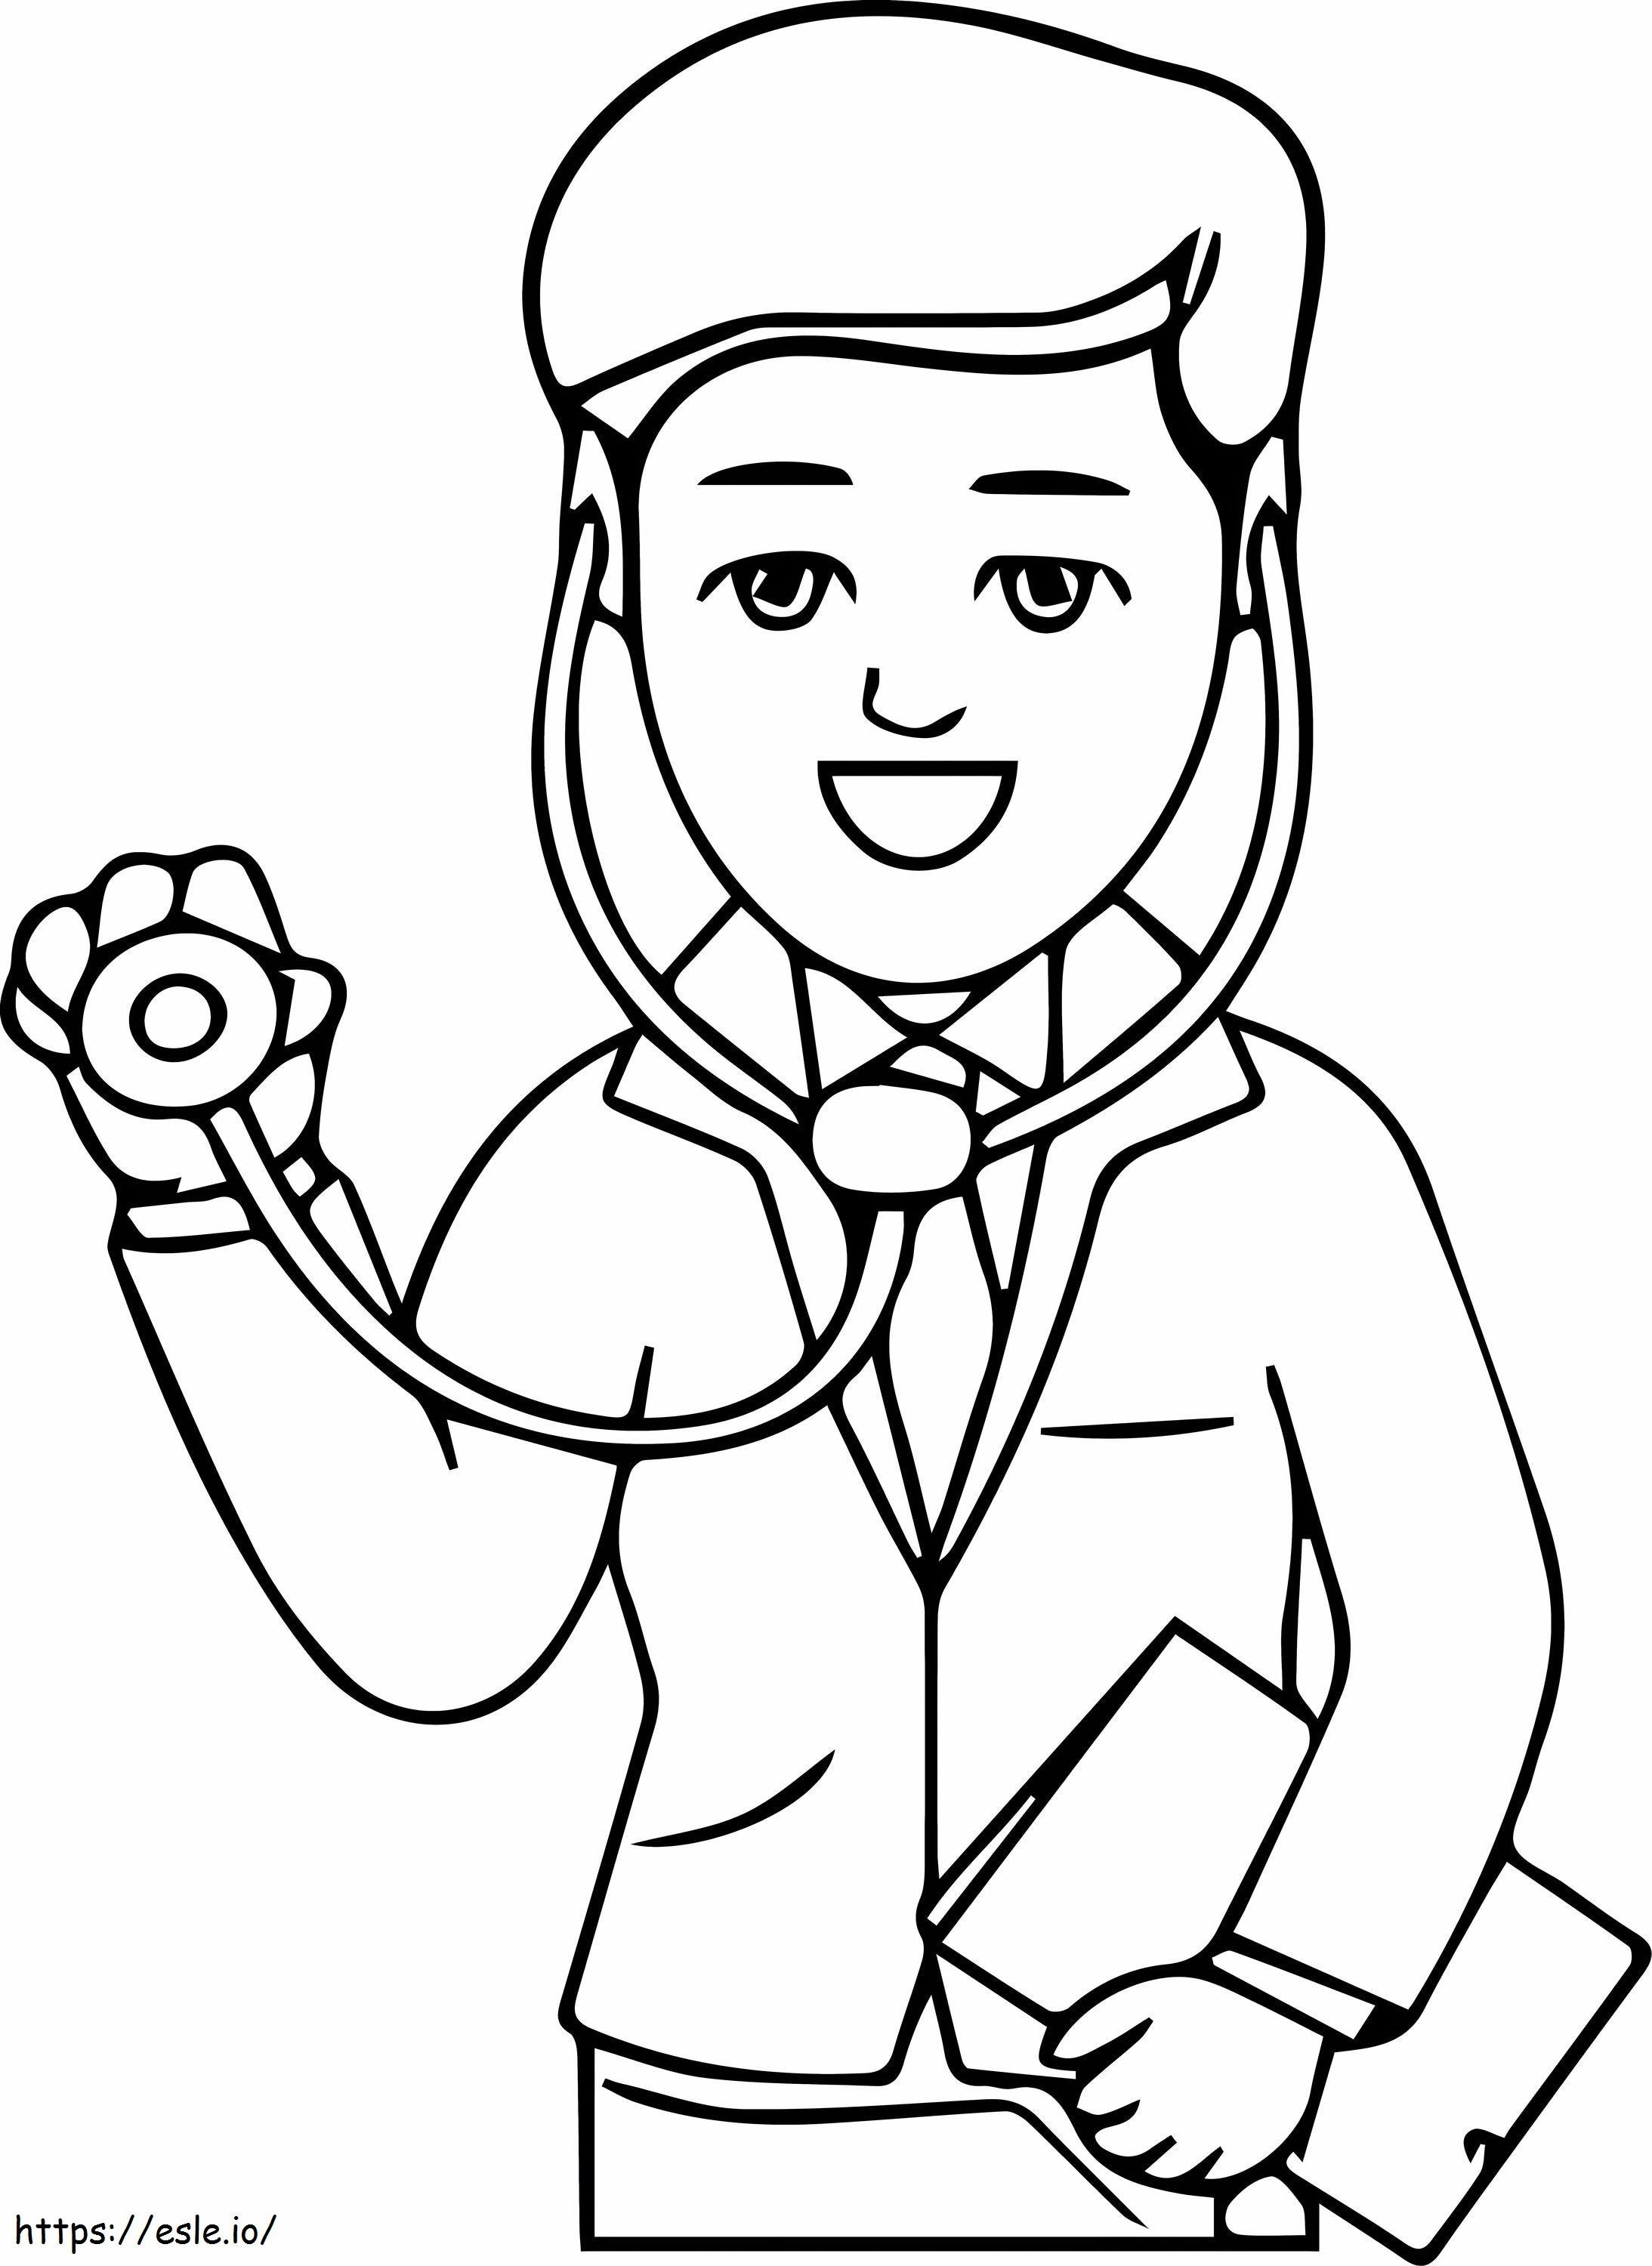 Professional Doctor coloring page